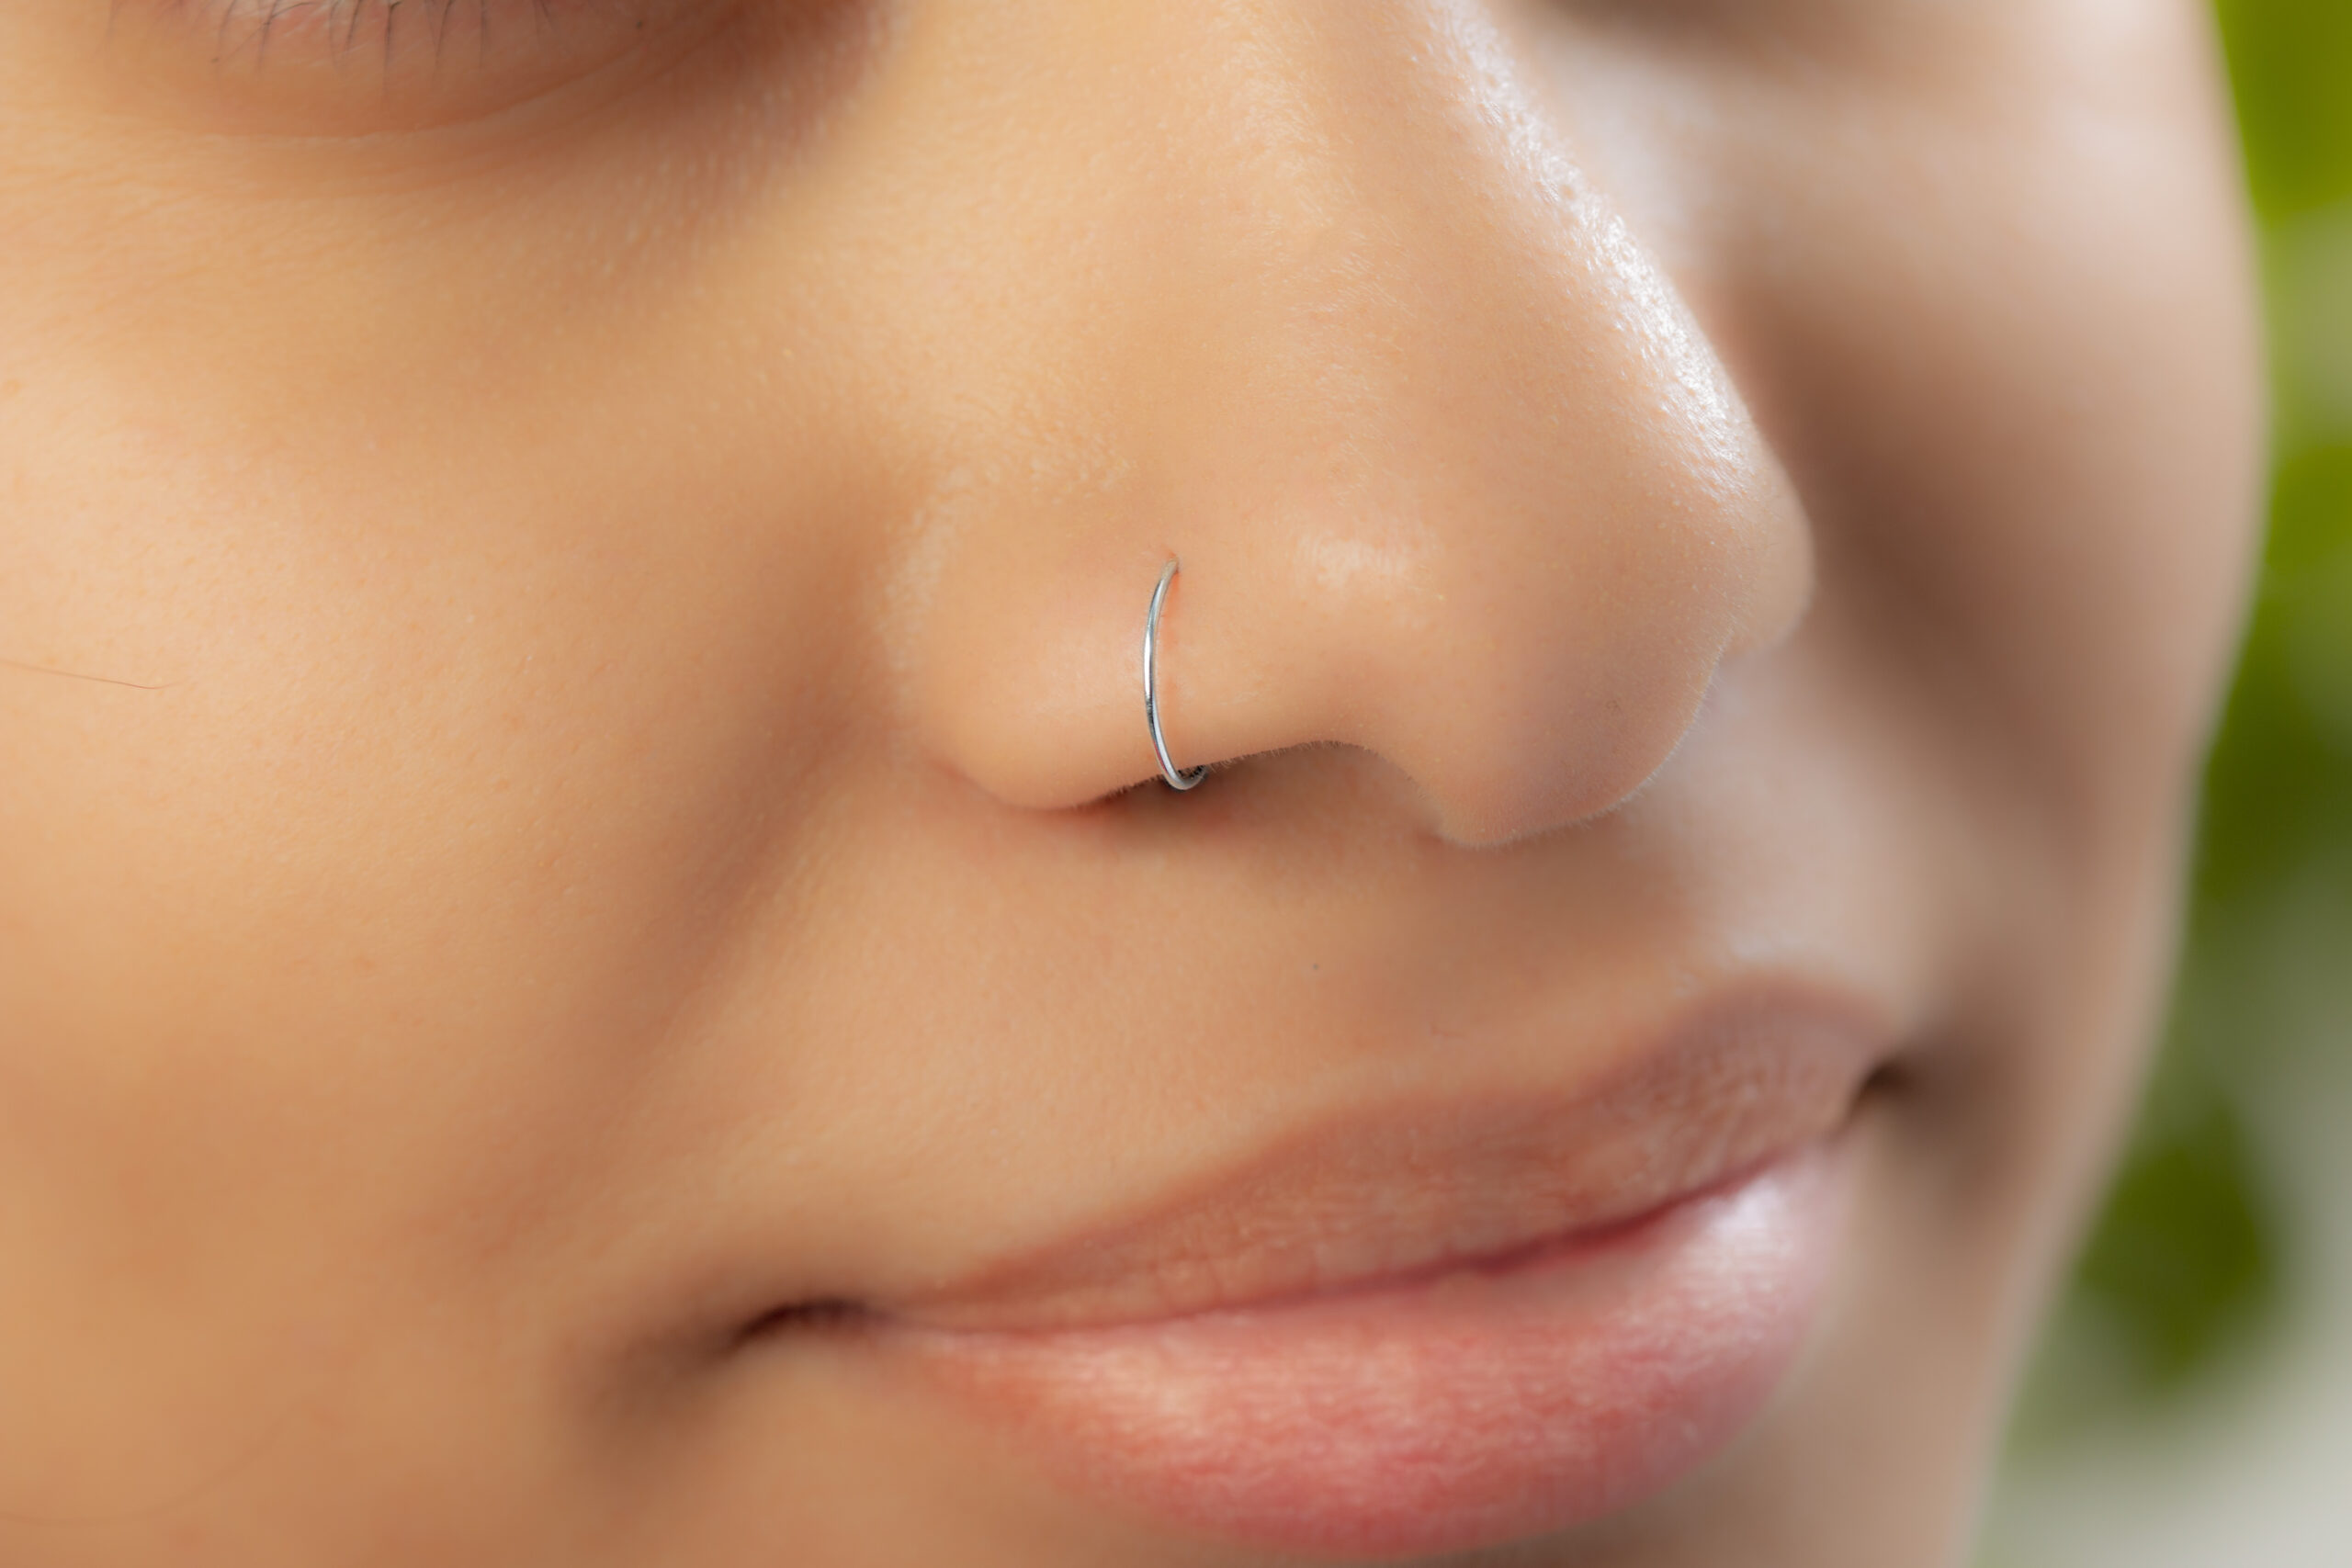 Fake nose piercing with eleven crystals